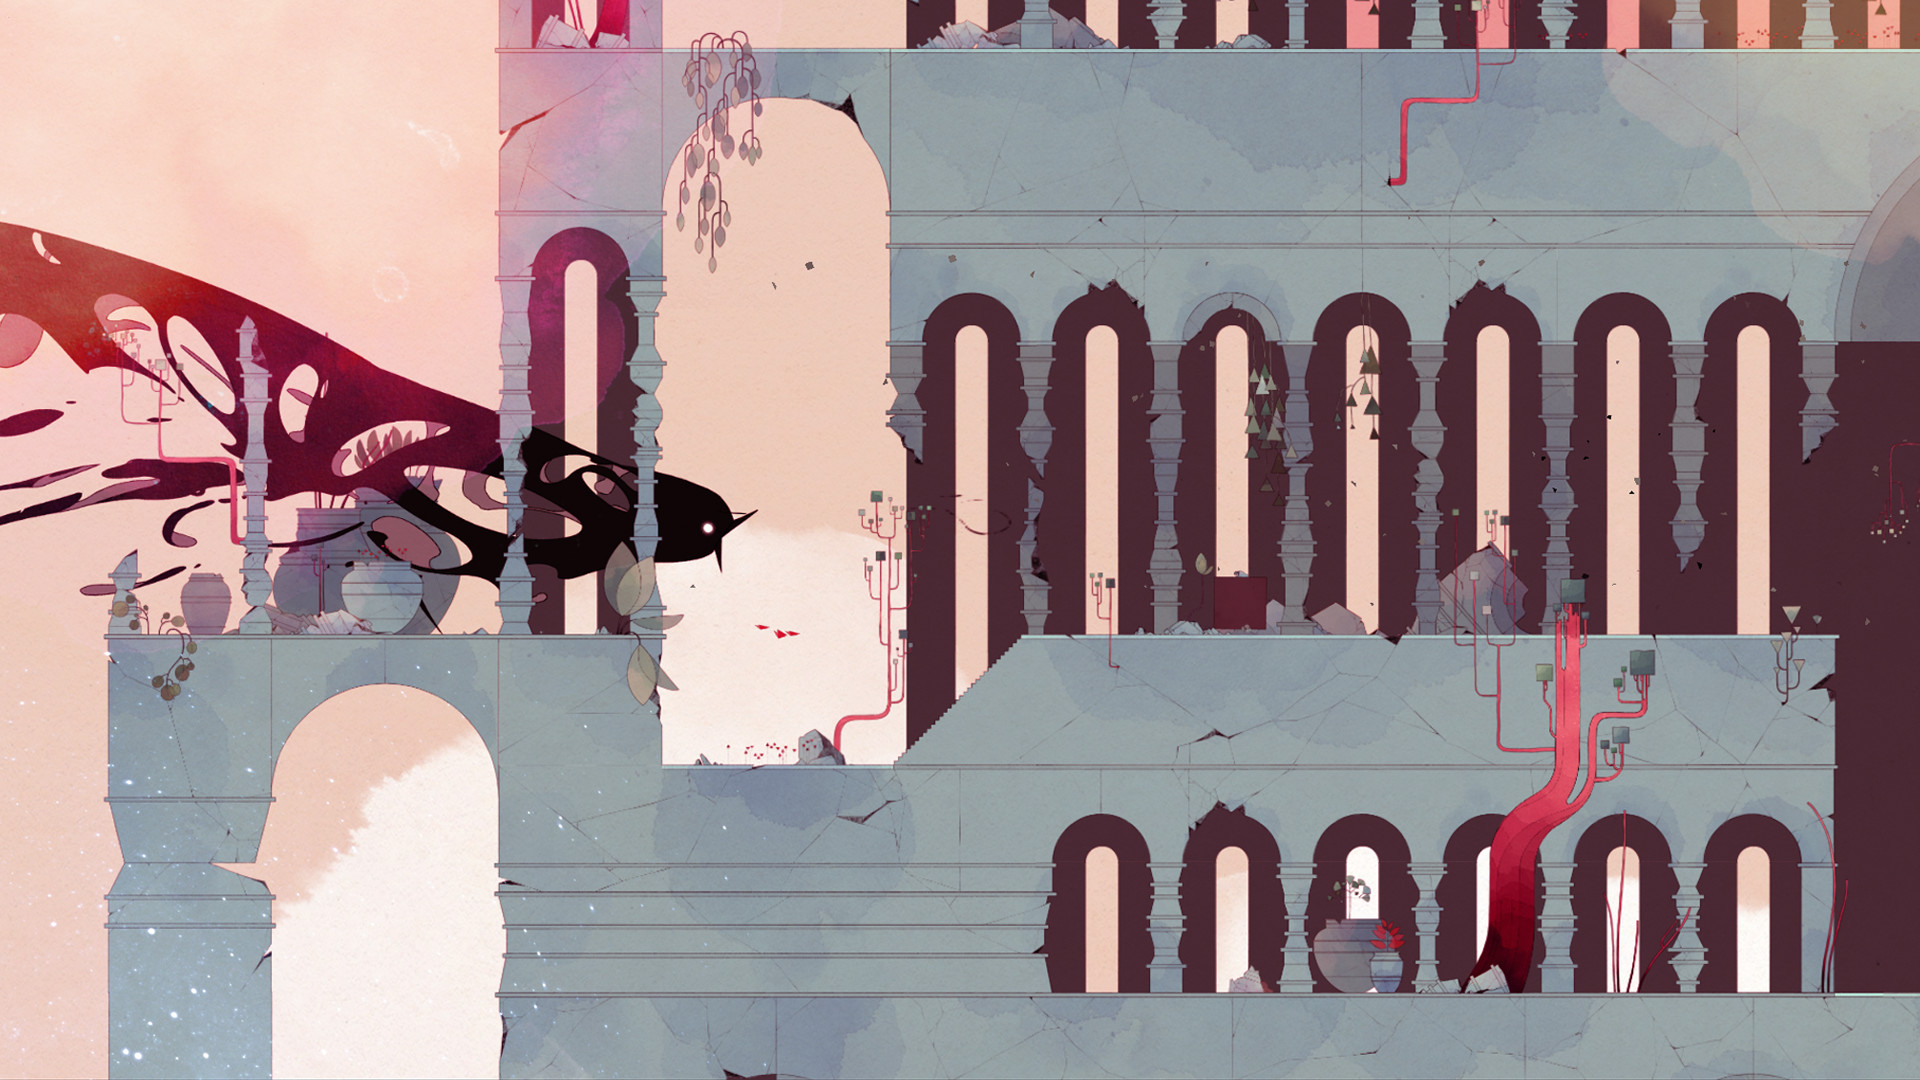 Video Game Gris 1920x1080